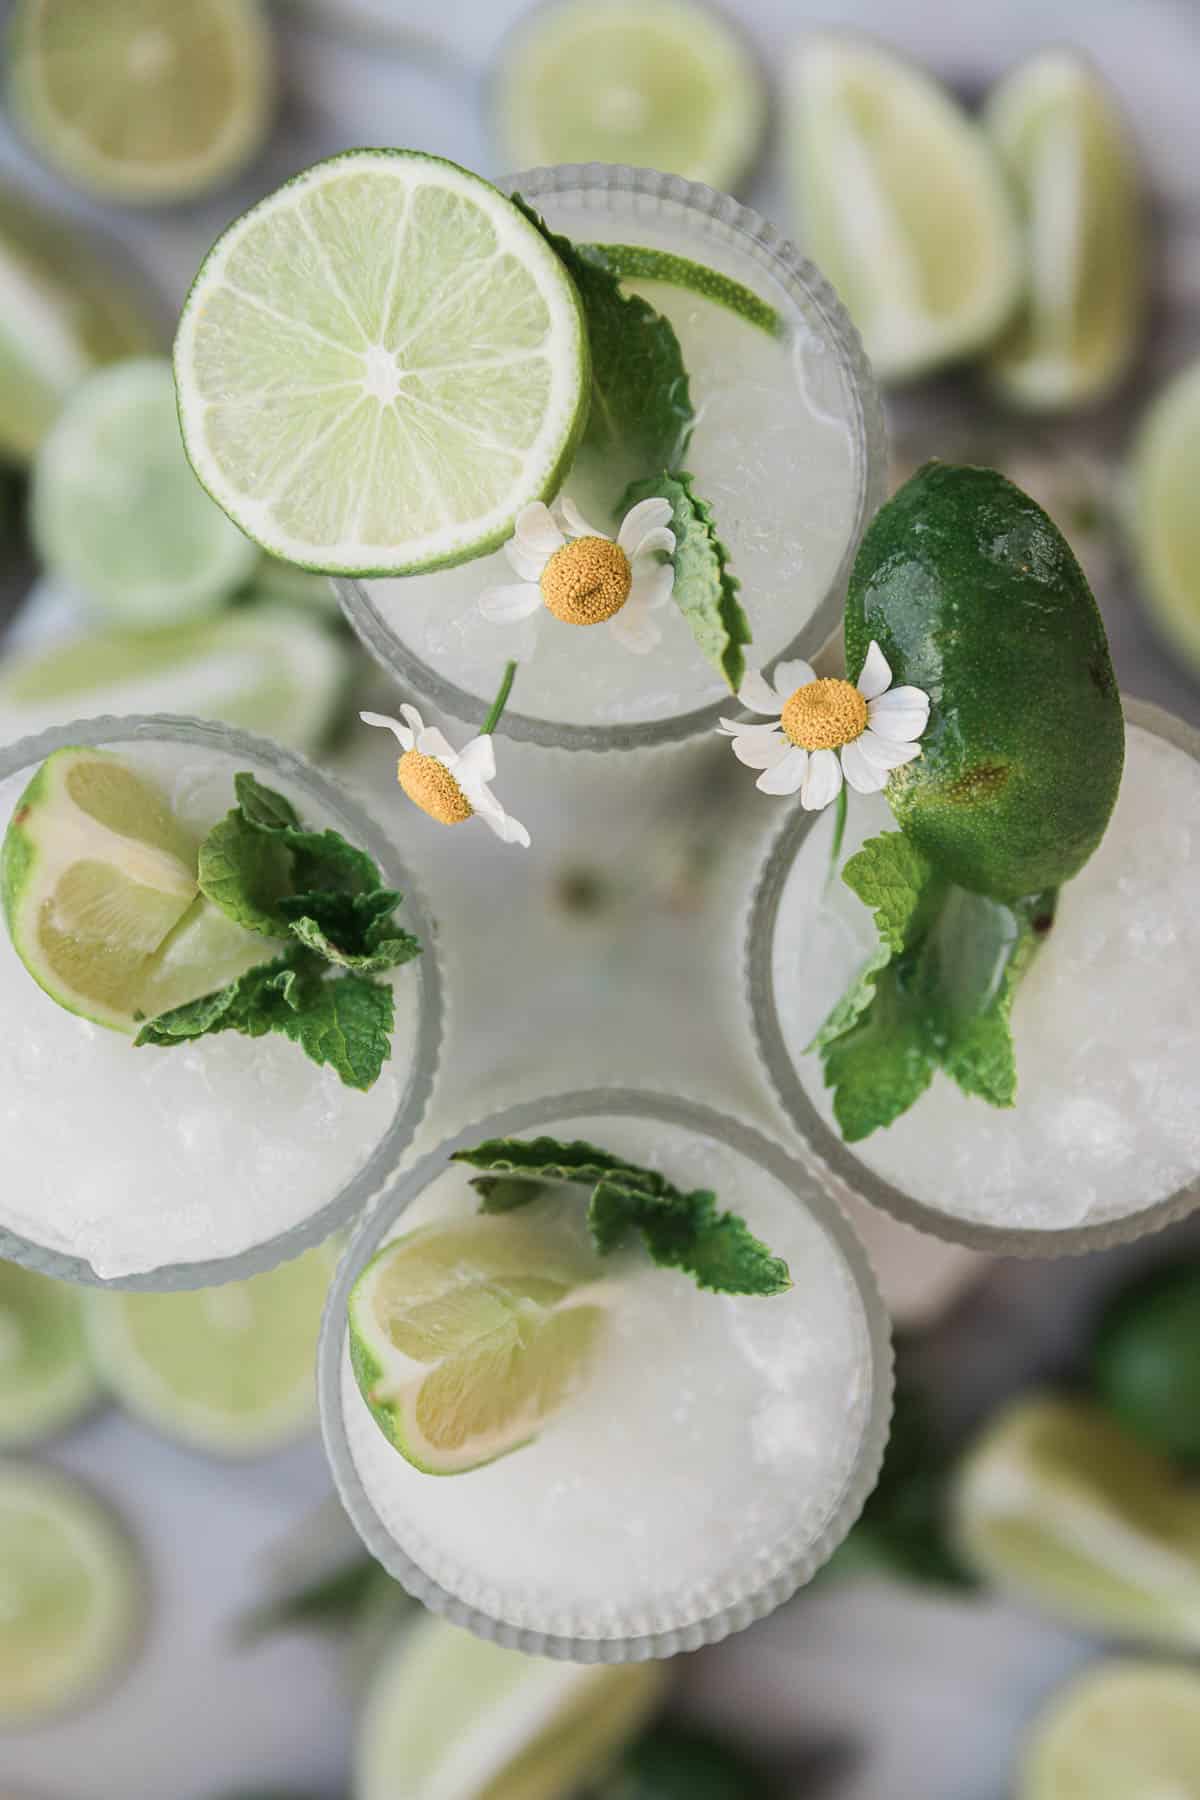 An overhead shot of Brazilian limeade, The glasses are garnished with mint and limes.